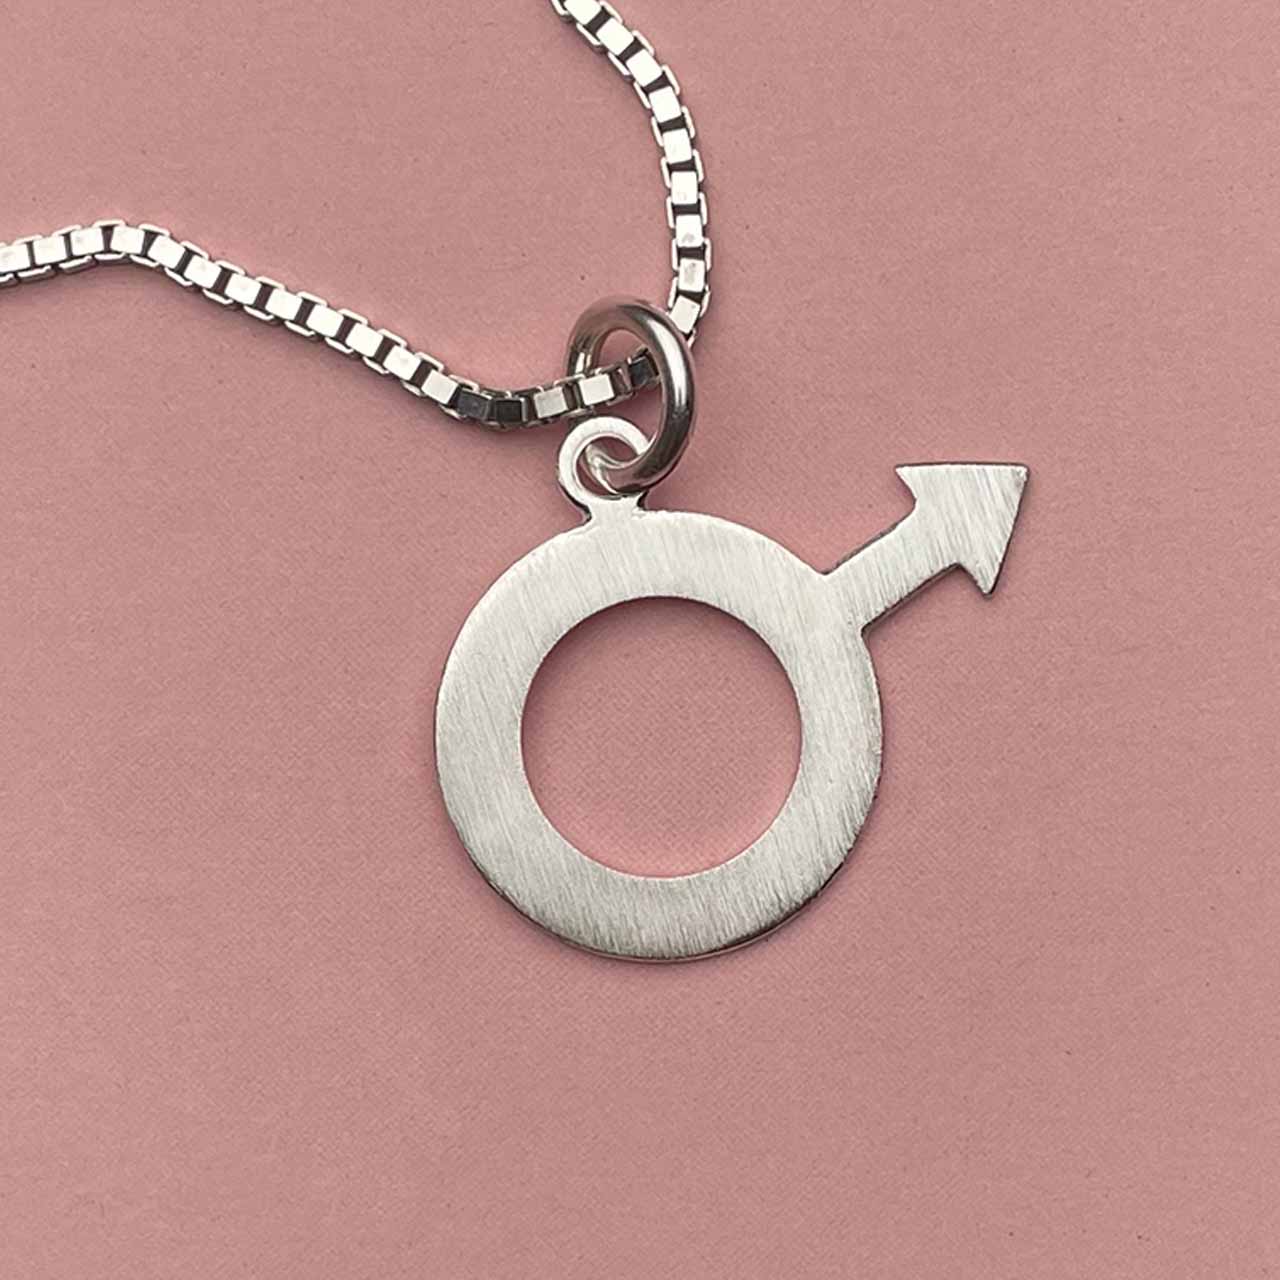 Buy Male Gender Mars Symbol Necklace, 16-36 Long Chain, Men Man Boy Dude  Charm Pendant Sex Sign Jewelry Gift Bag Fast Ship Nb Online in India - Etsy